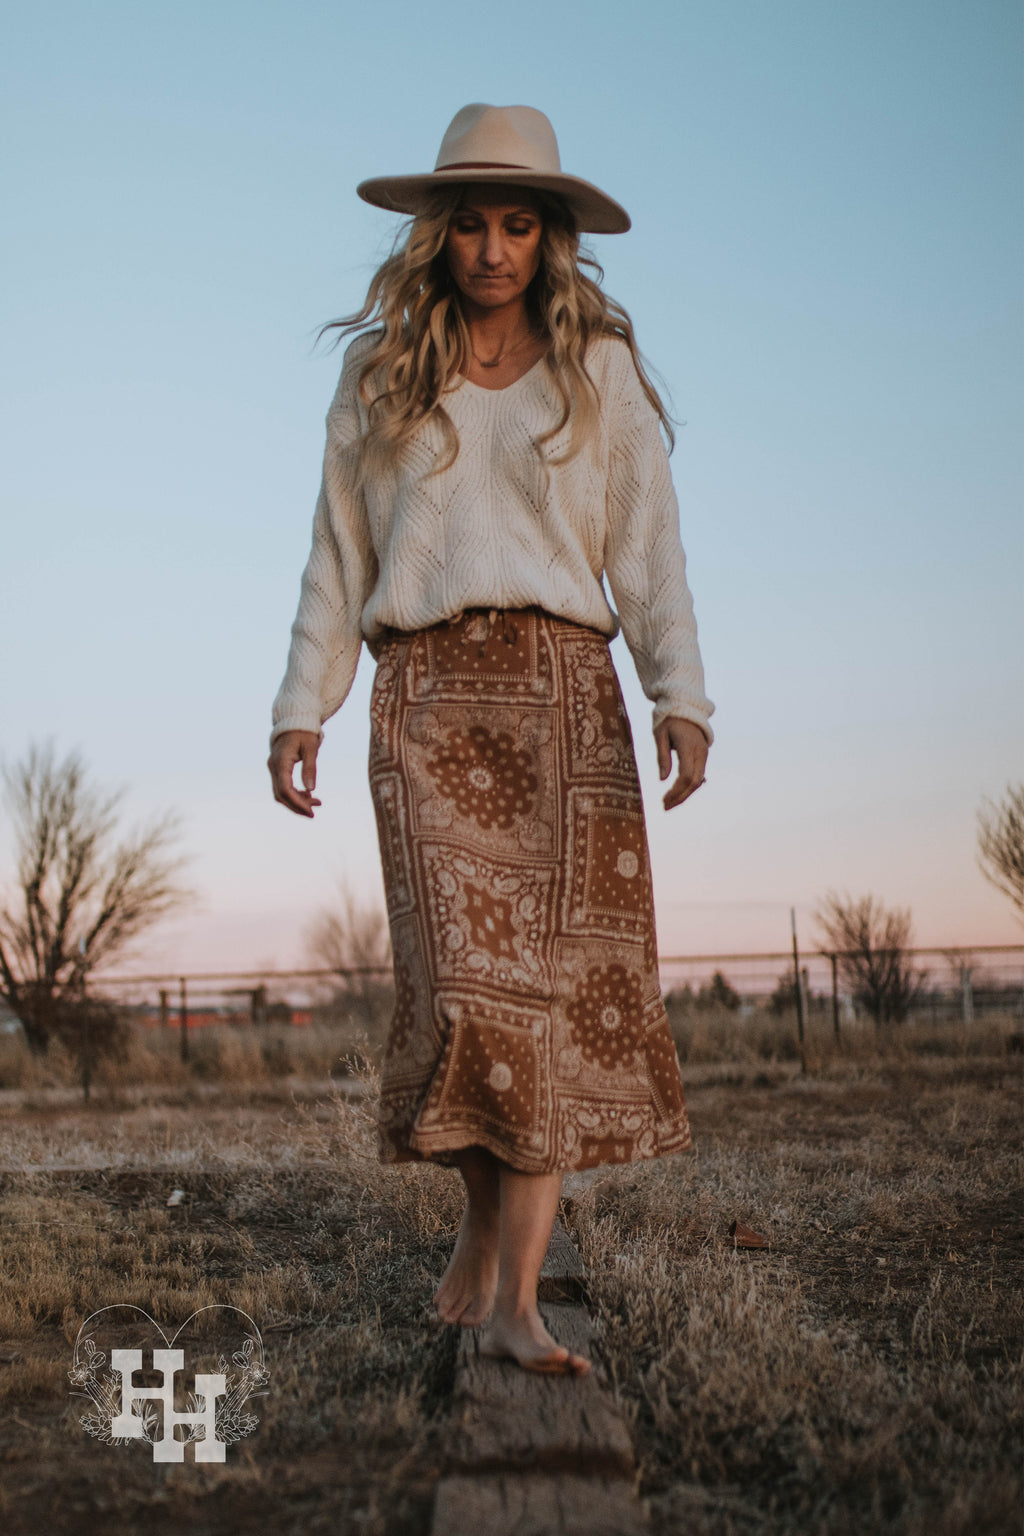 Giirl walking on a ranch with ivory chenille cable knit swearter tucked into a brown bandana skirt. She is also wearing a ivory colored wide brim hat with a brown strap around it.